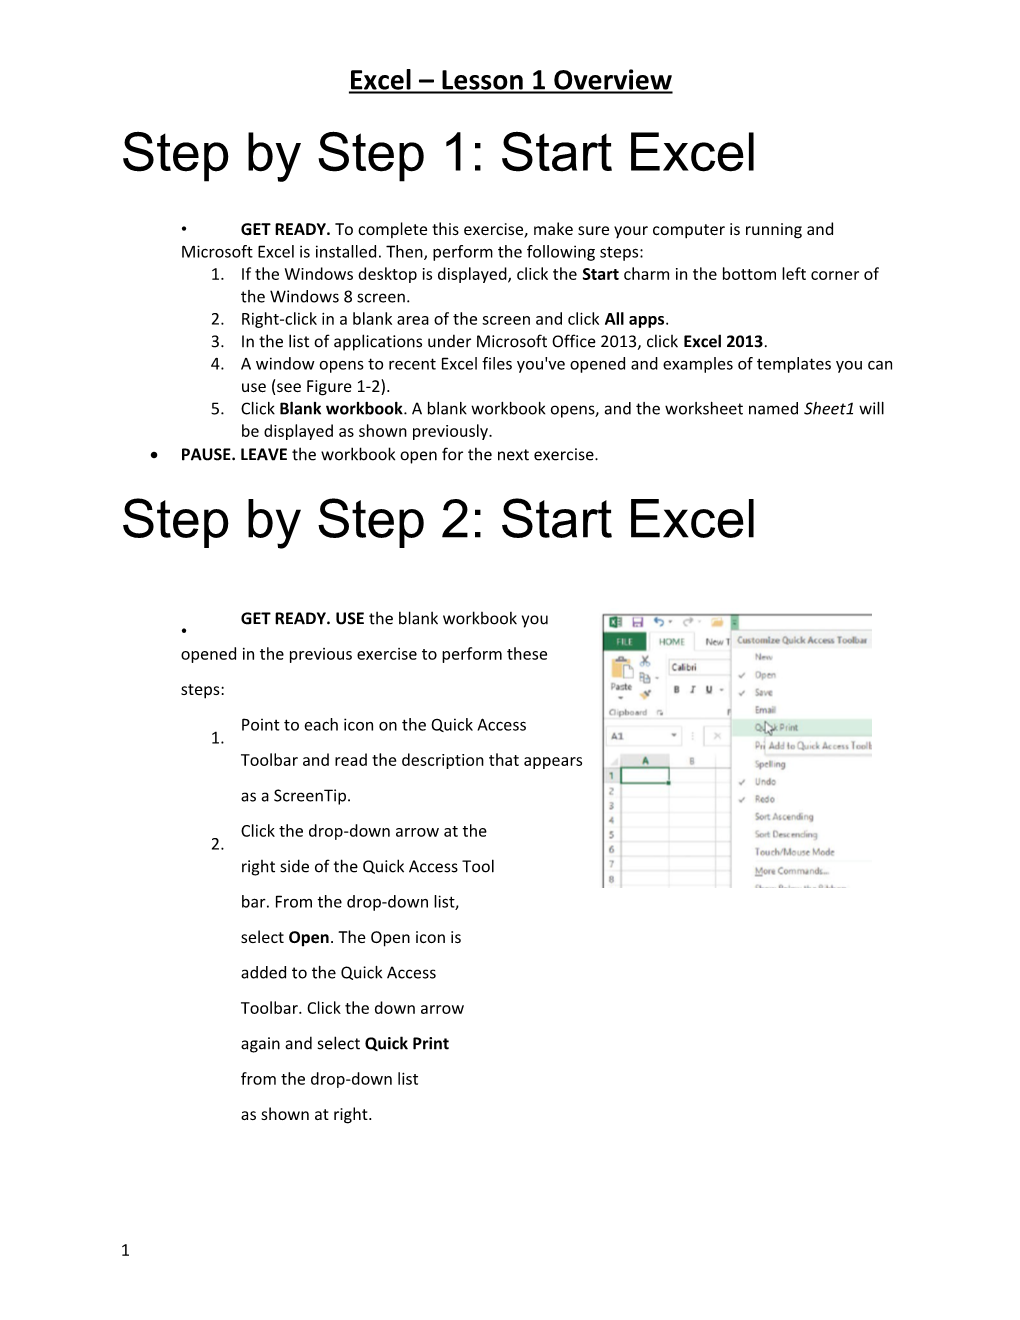 Excel Lesson 1 Overview